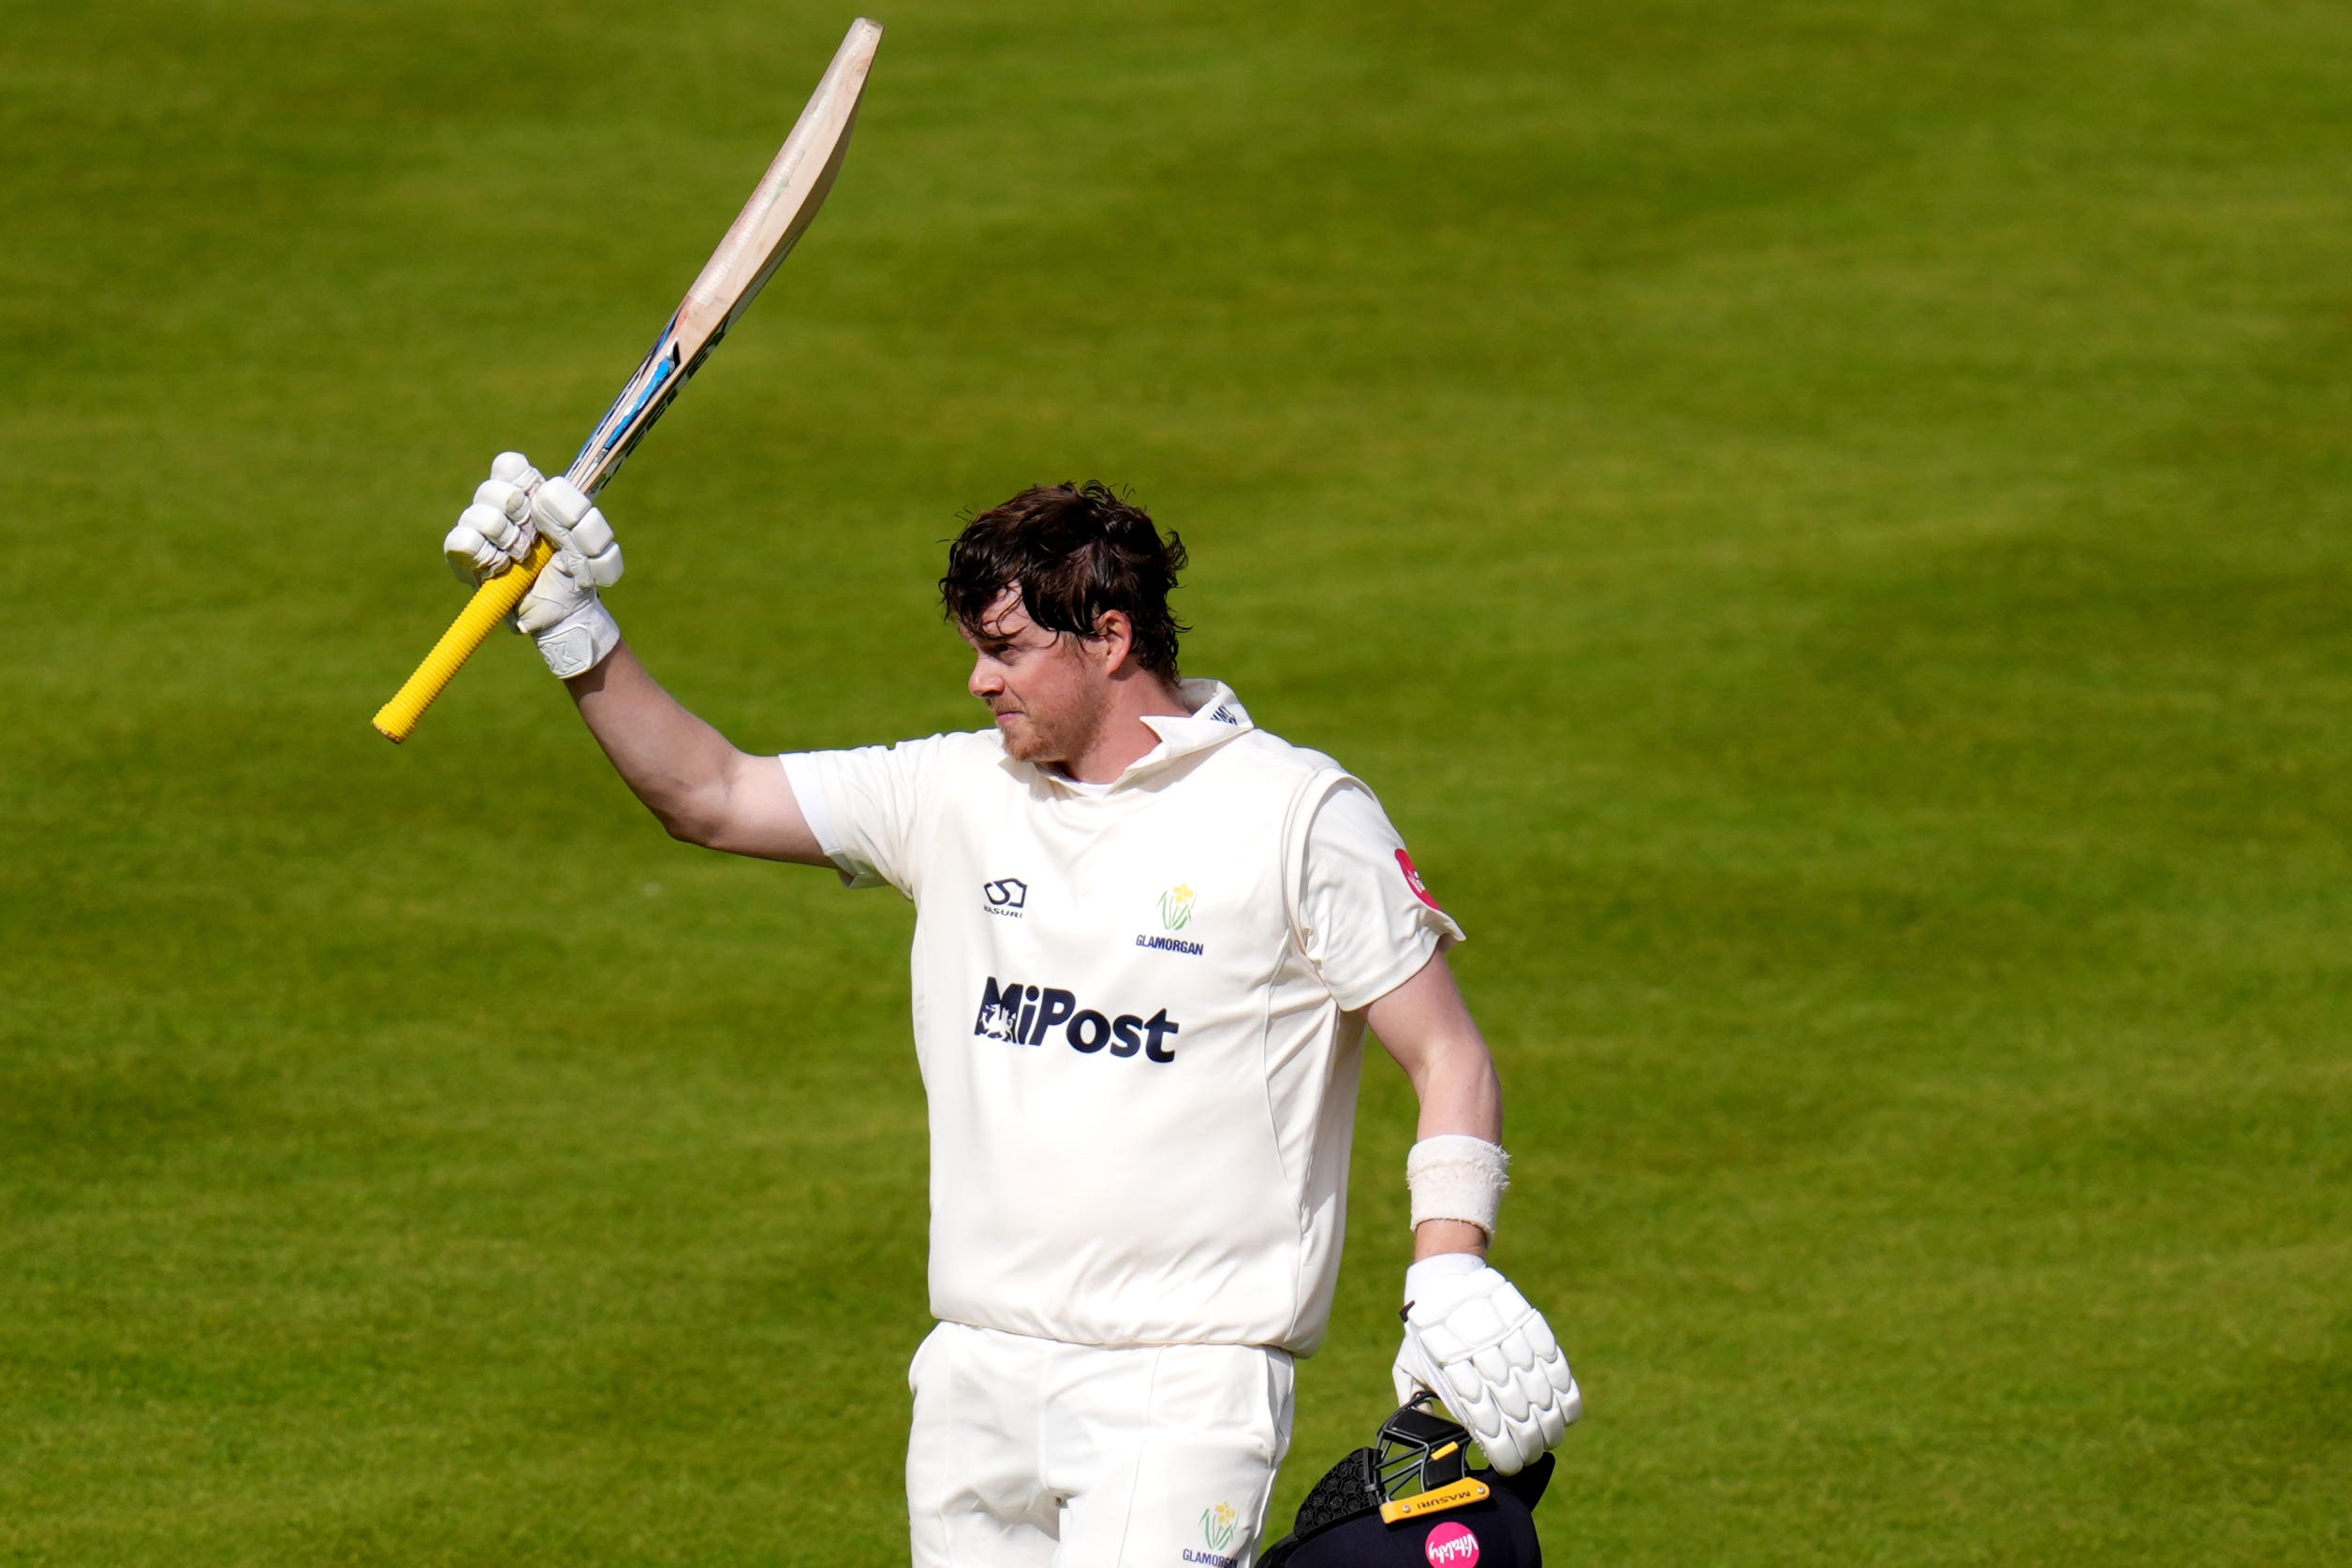 Northeast scored 335 not out as Glamorgan punished Middlesex